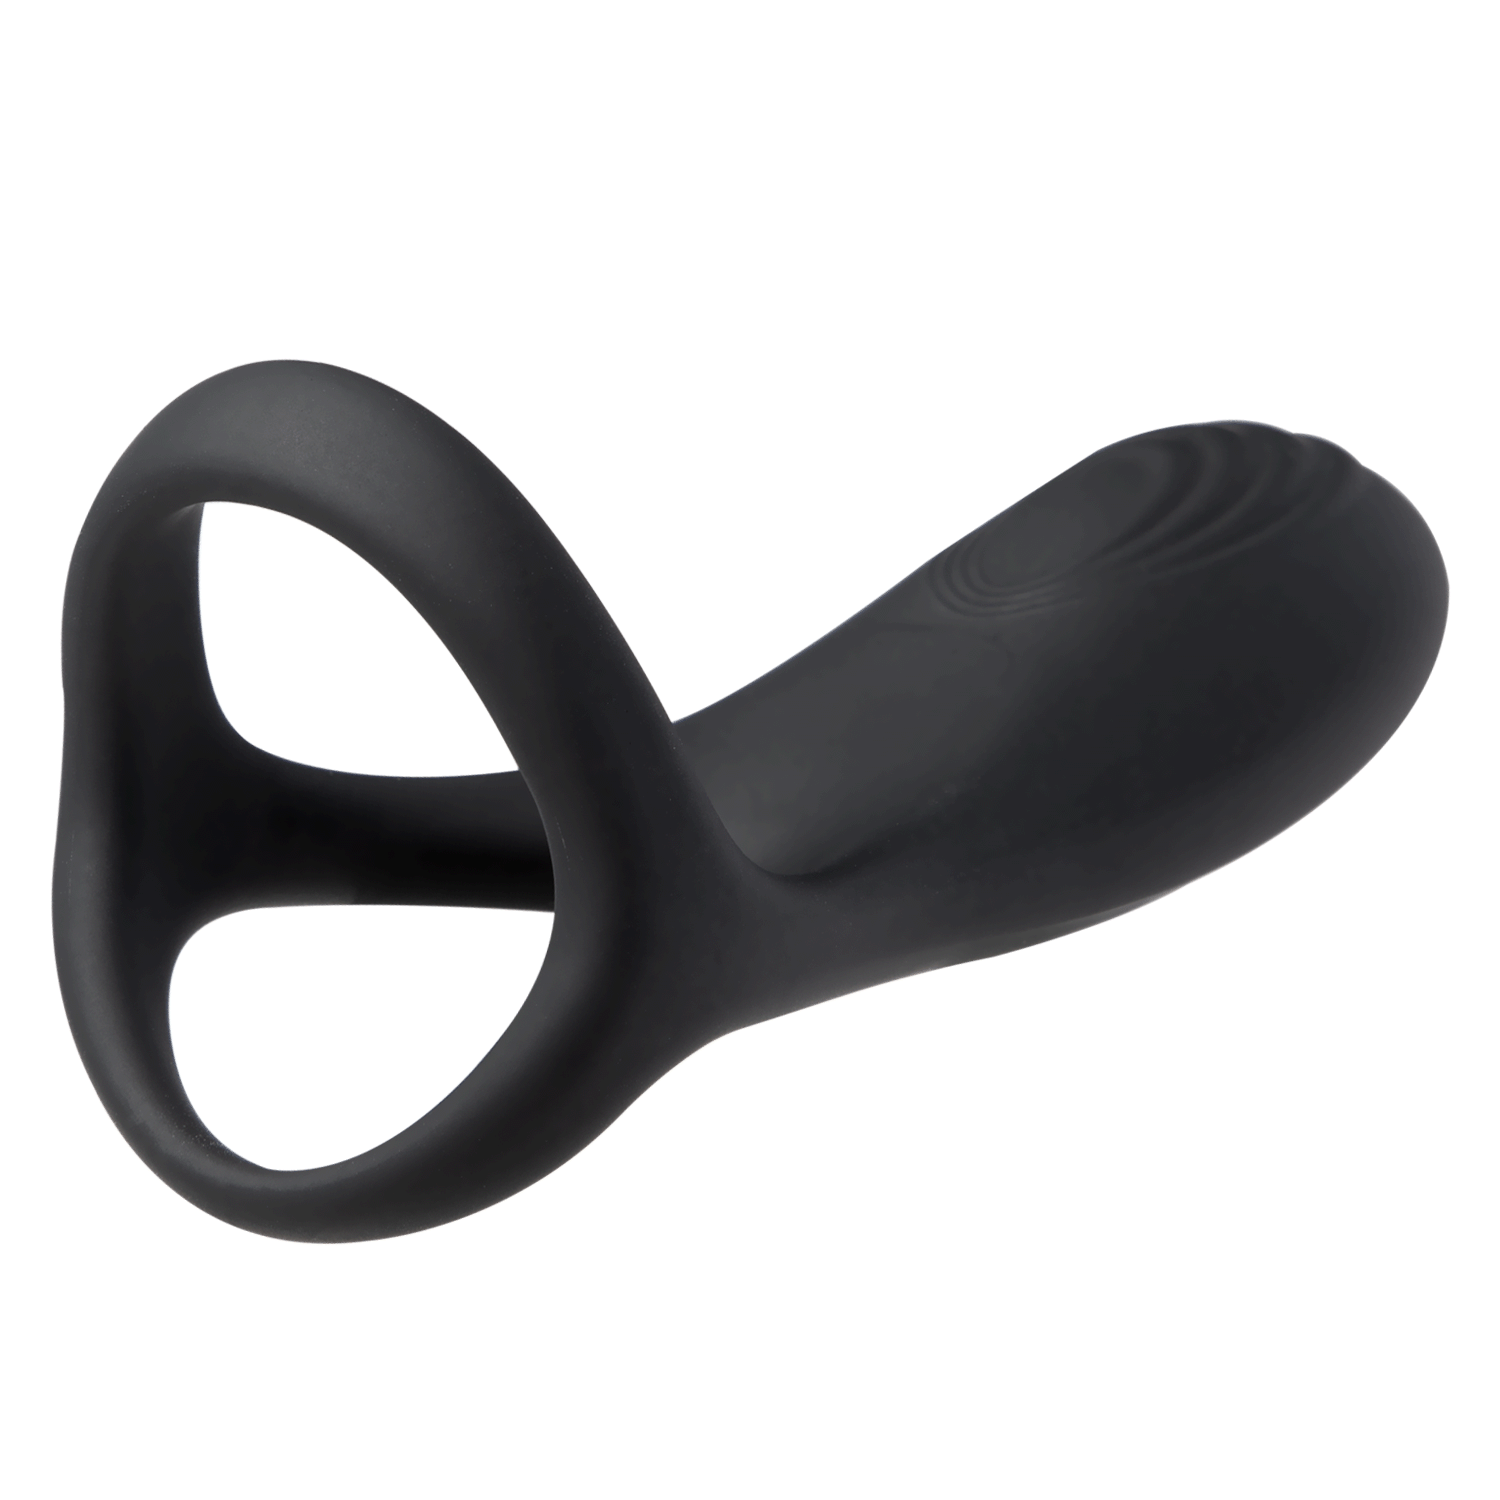 Ryder - Remote Control Dual Ring Vibrating Cock Ring for Couple Play